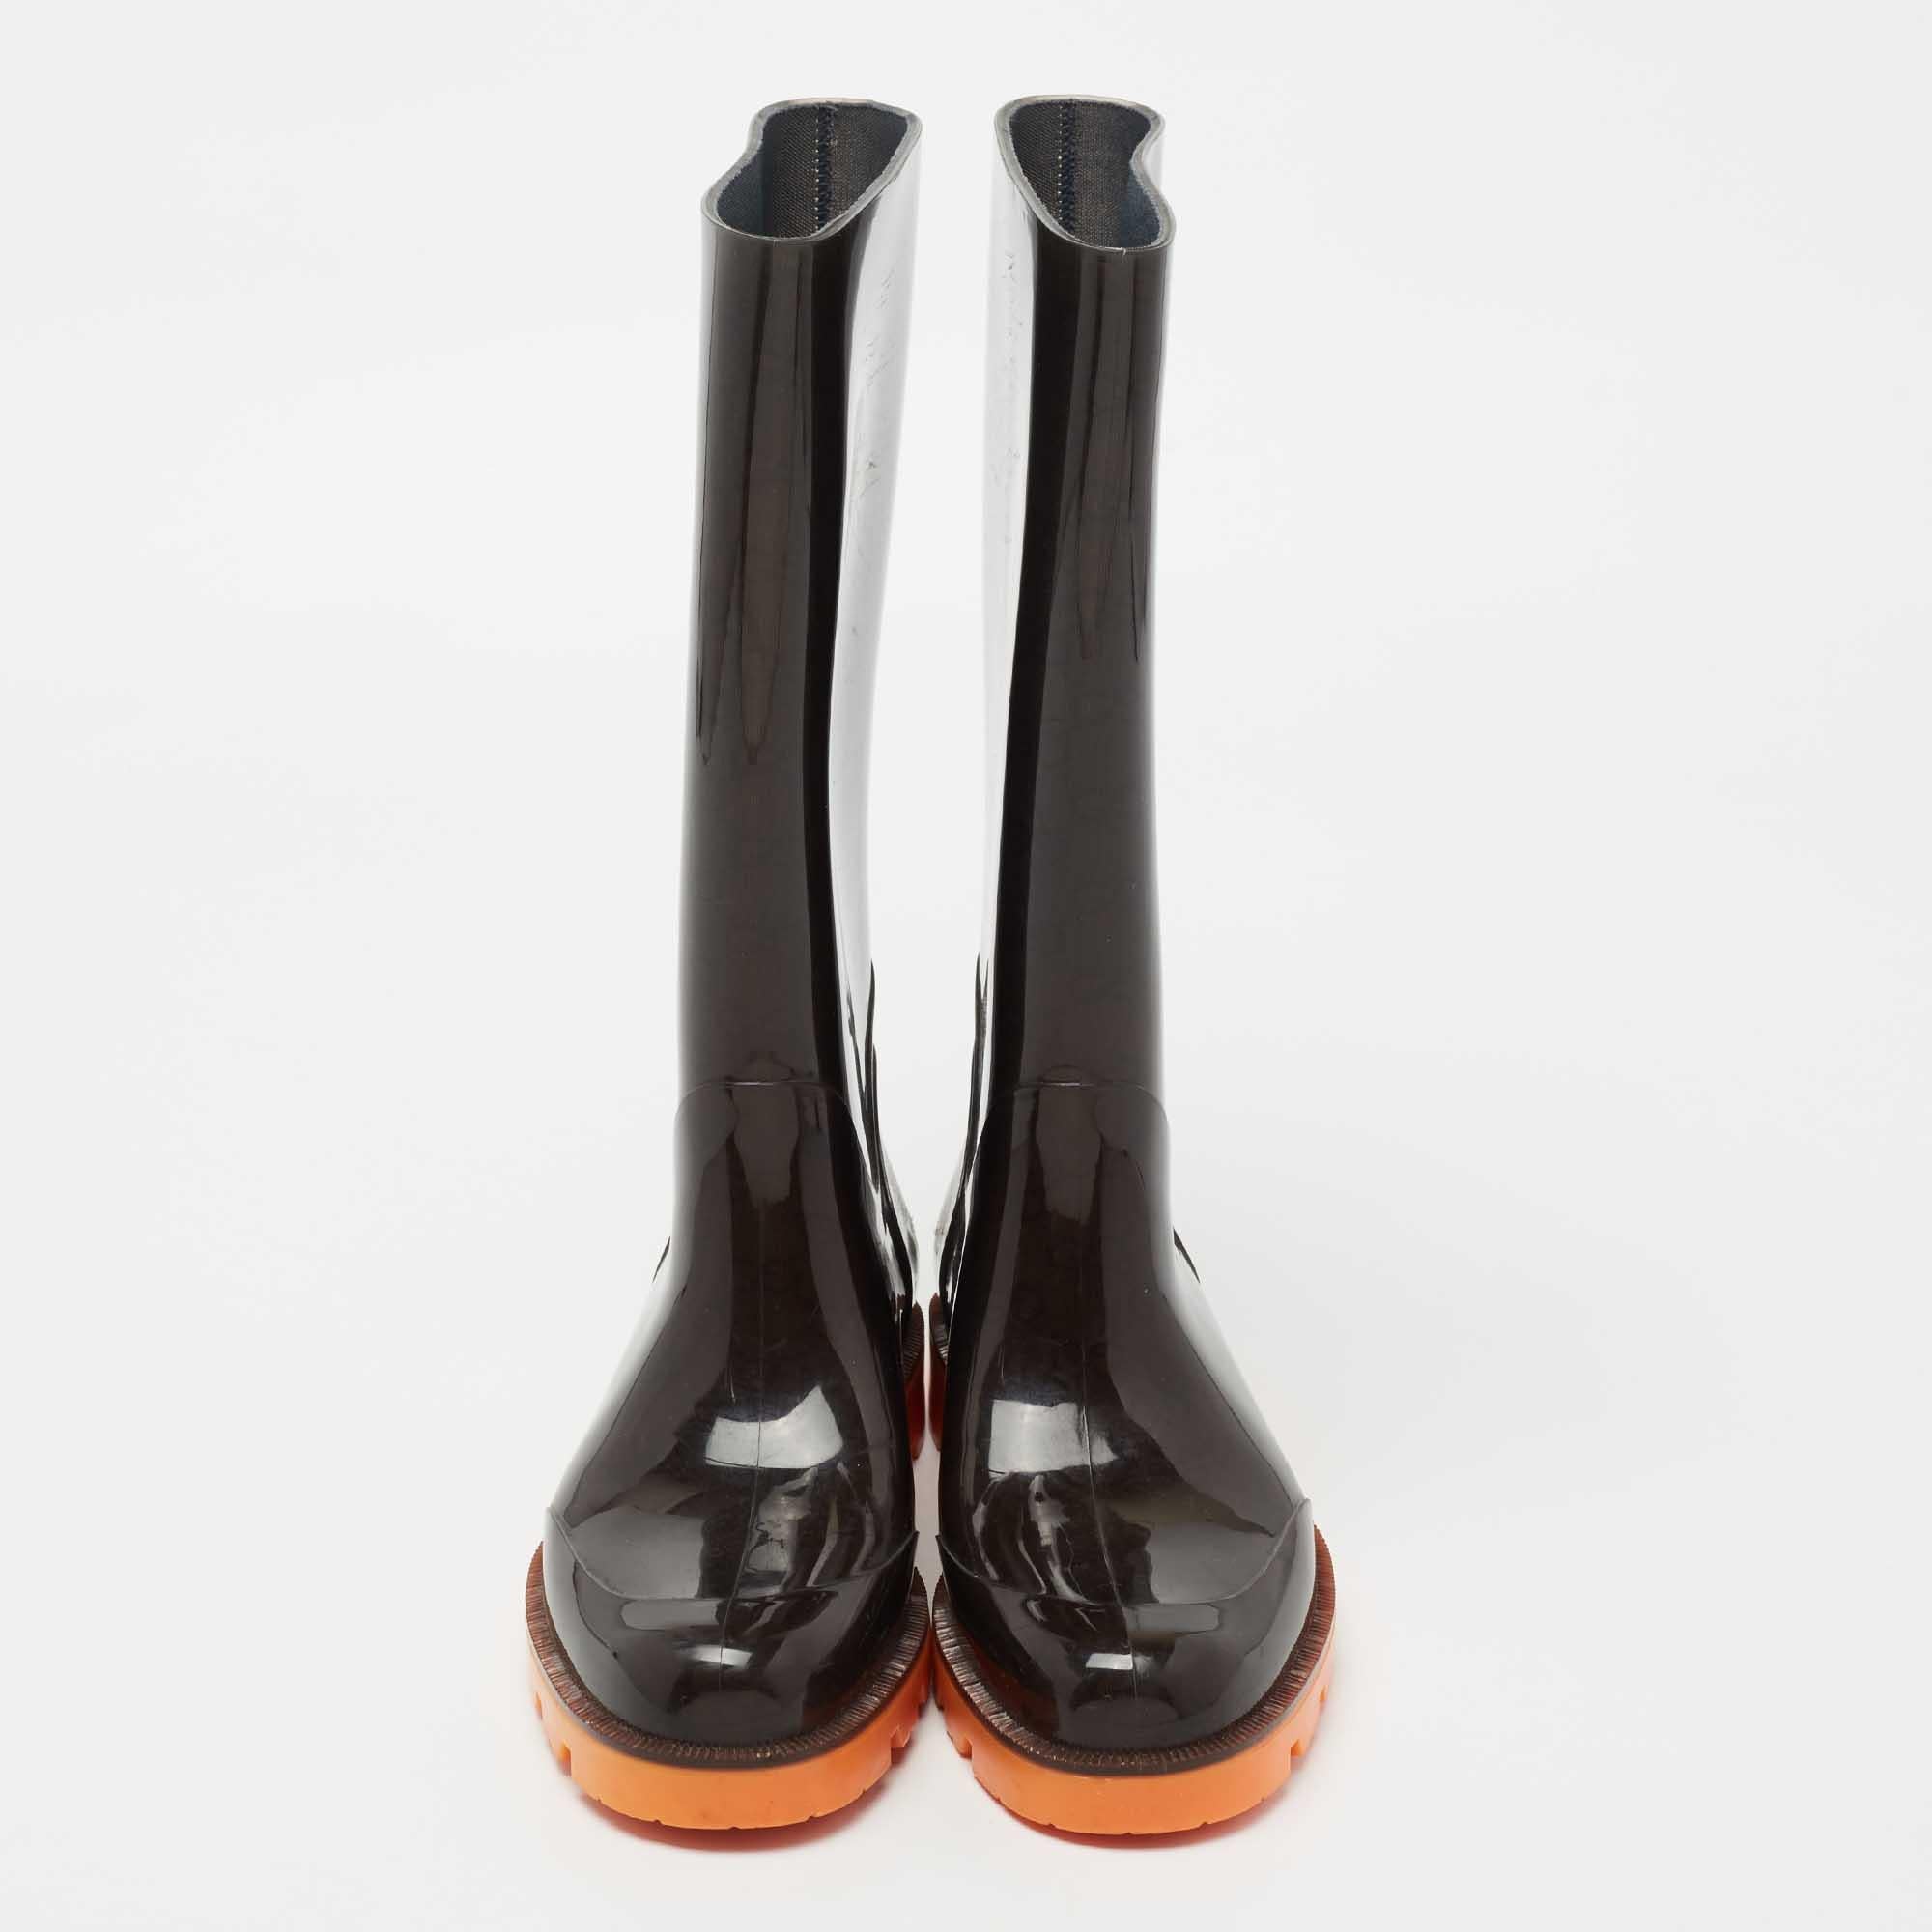 Black Gucci Rain Boots - For Sale on 1stDibs